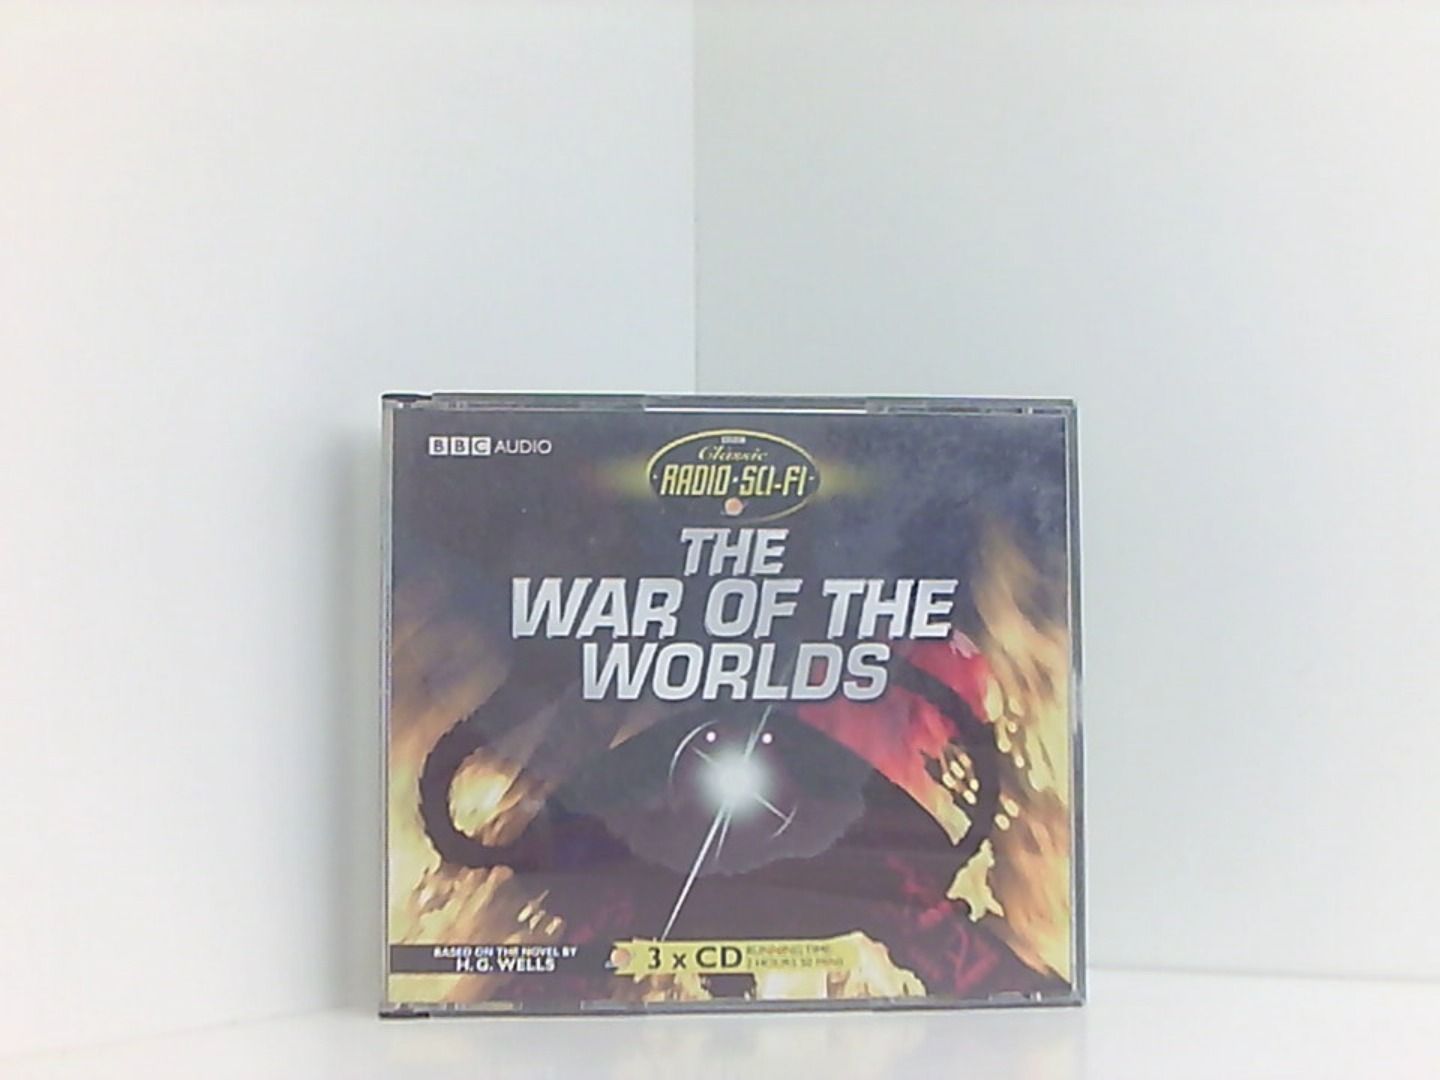 The War Of The Worlds (Classic Radio Sci-Fi) - Wells, H.G., Anthony Jackson Cast Full  u. a.